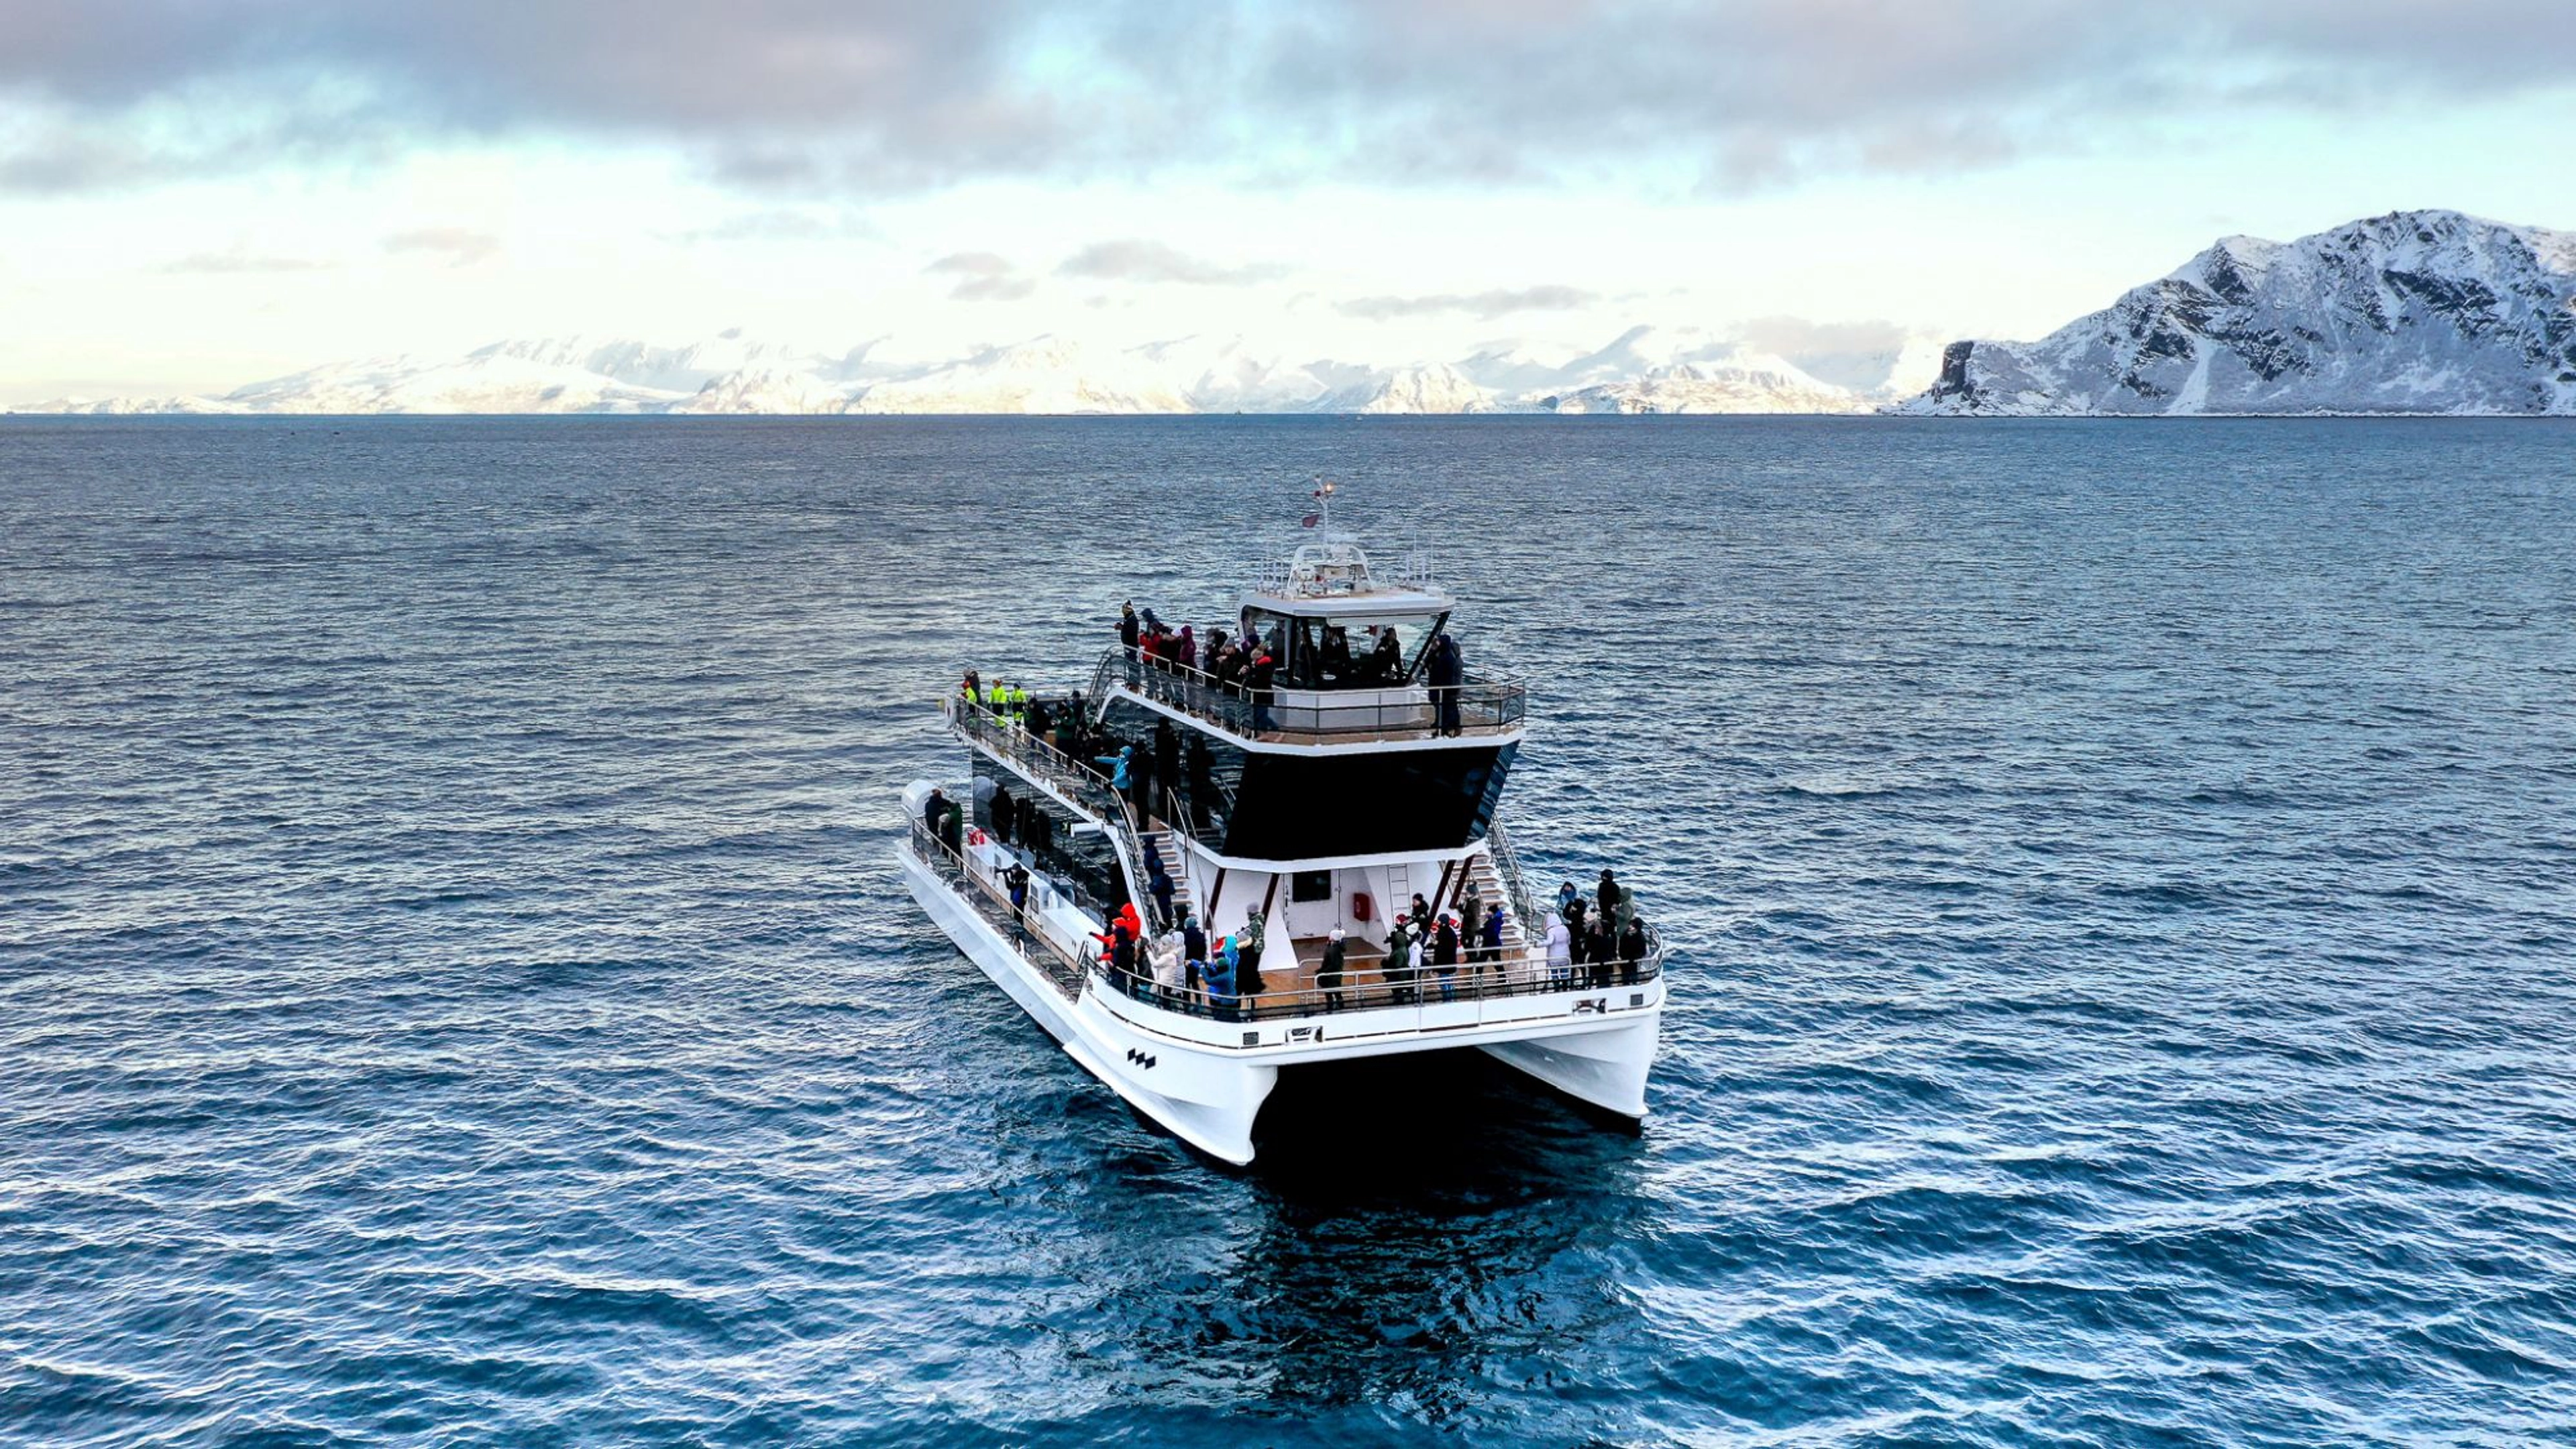 Things to do in Tromsø - Whale watching with a quiet hybrid boat - Tromsø